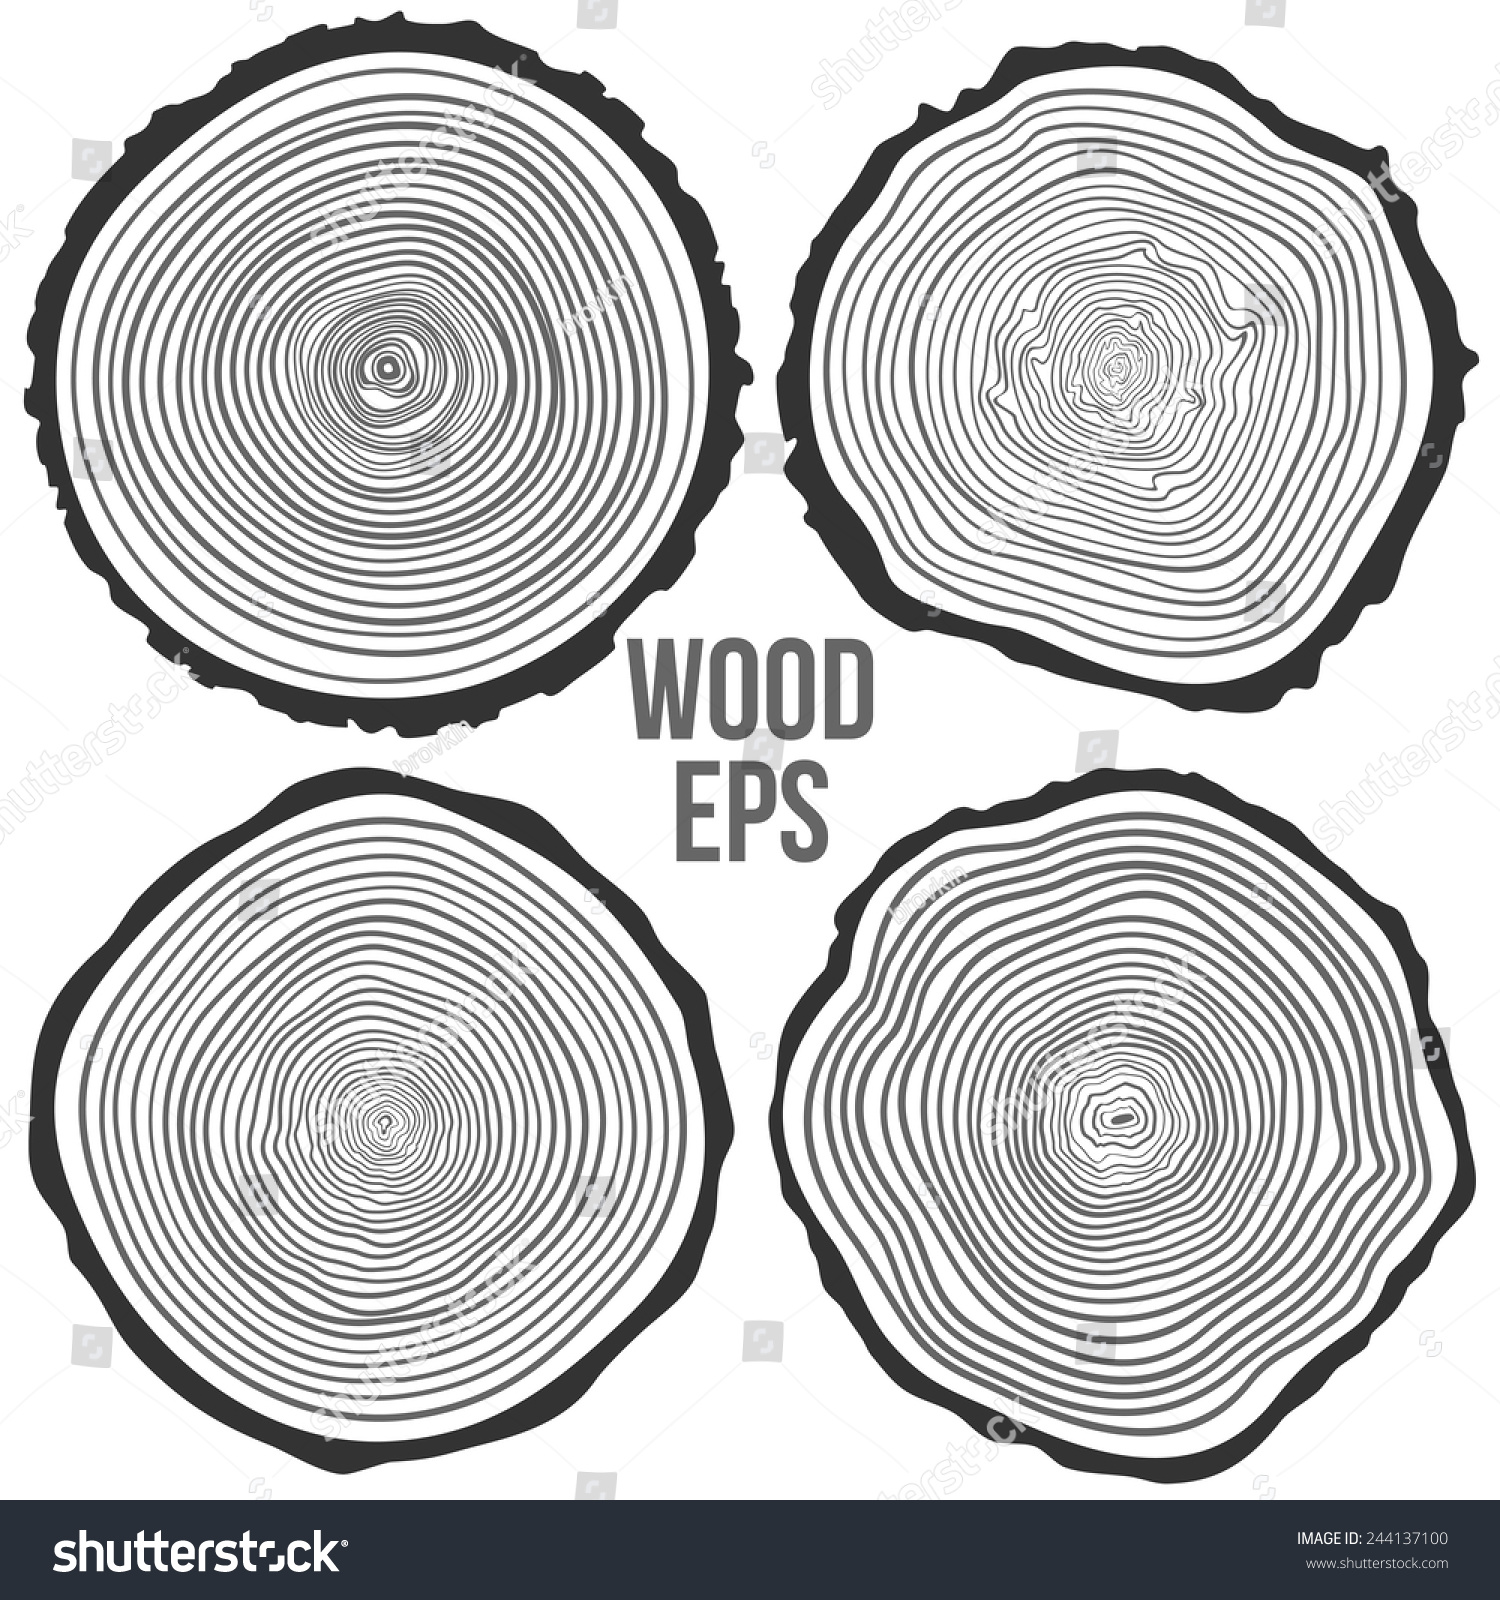 3,657 Tree cross section vector Images, Stock Photos & Vectors ...